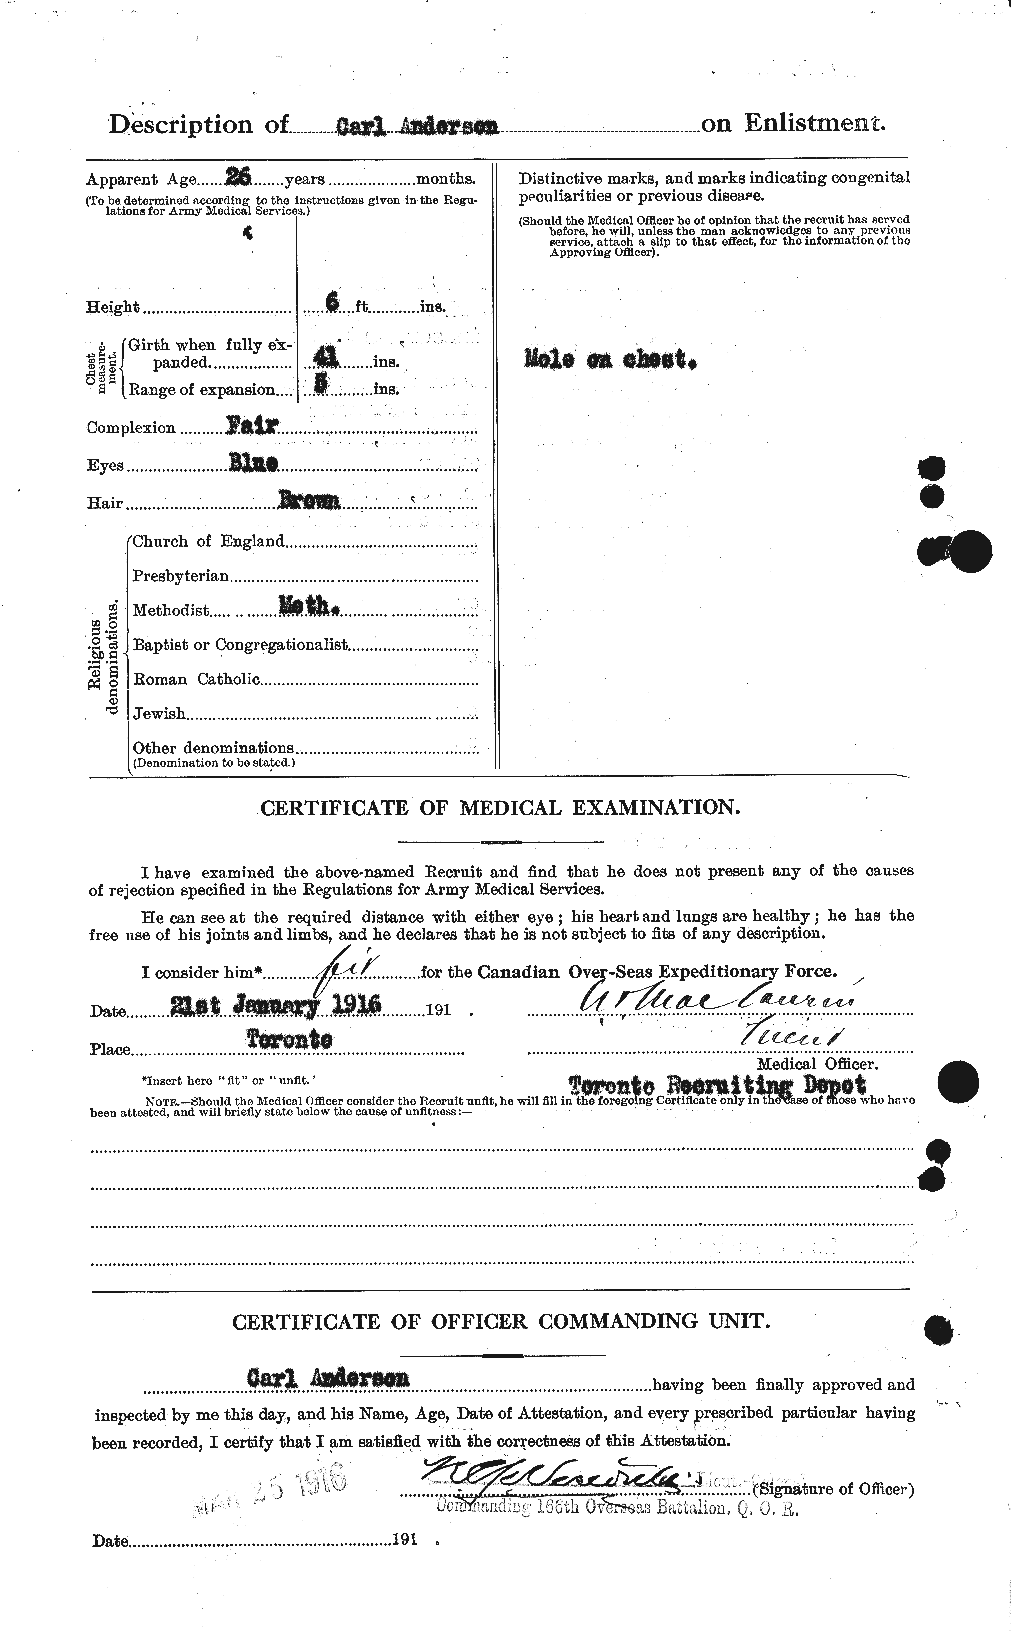 Personnel Records of the First World War - CEF 209291b